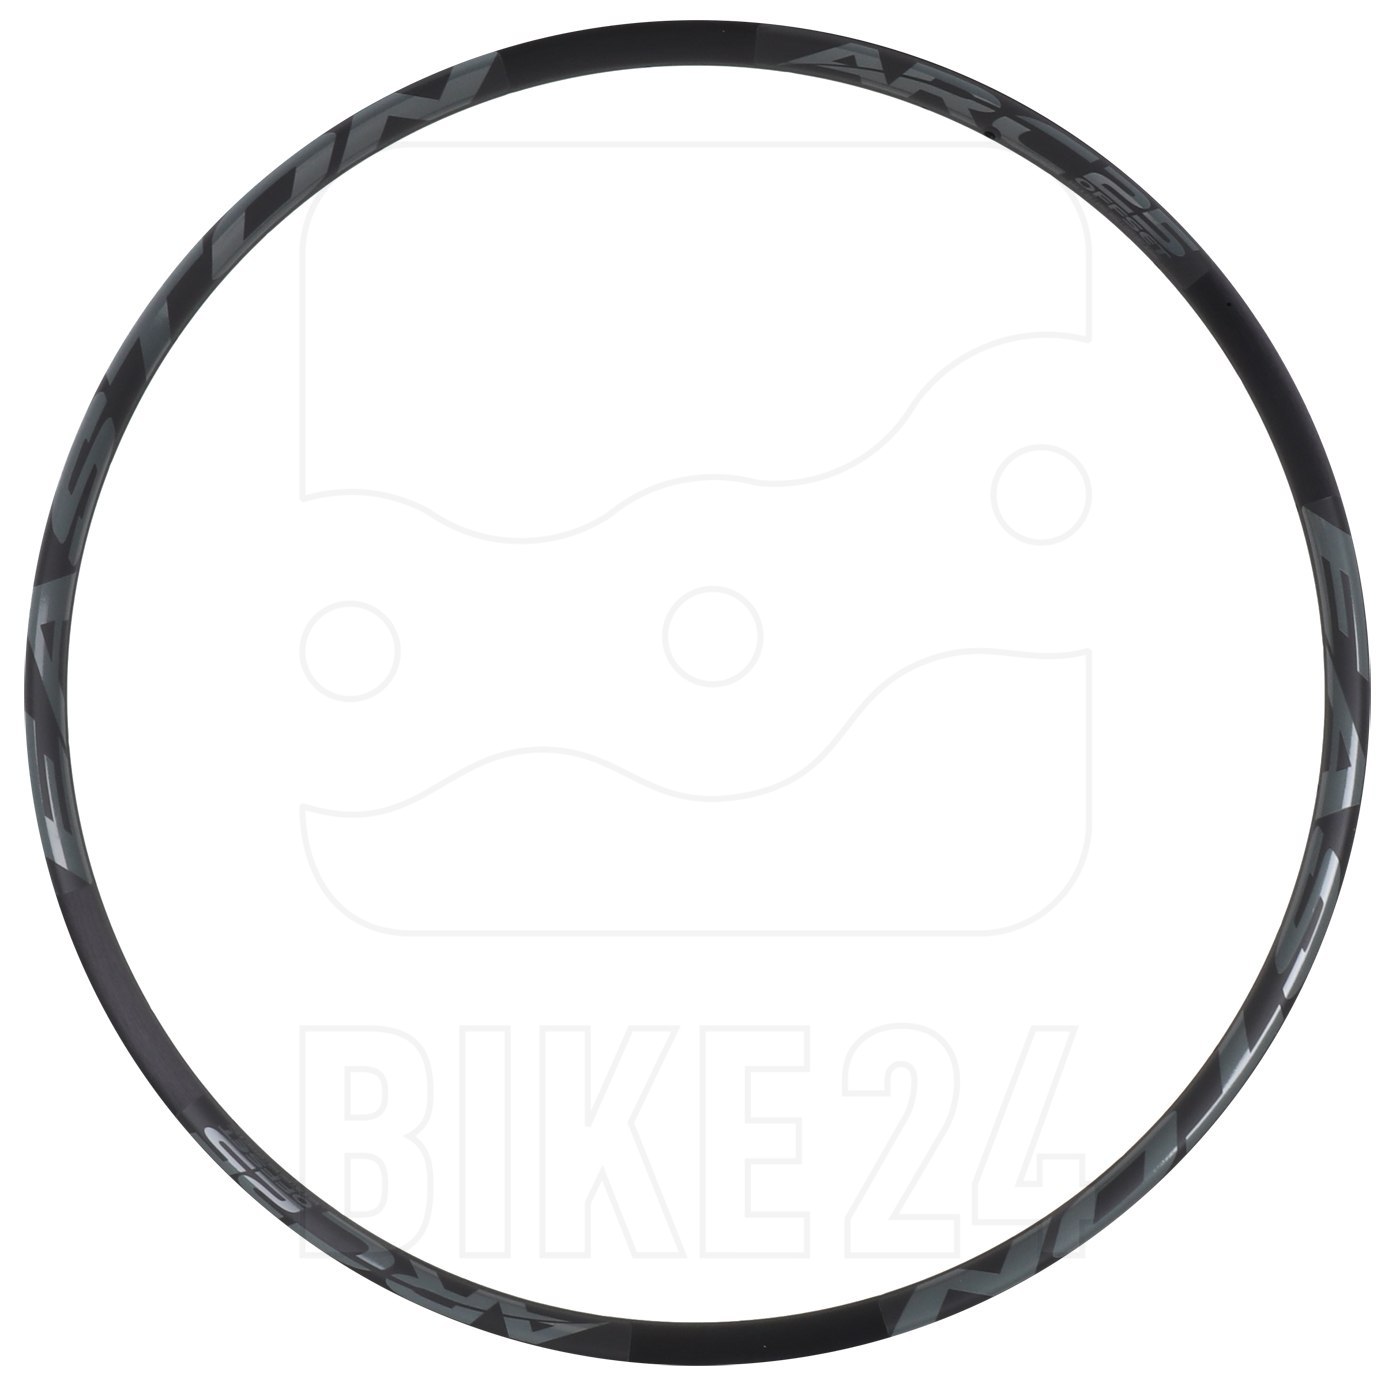 Image of Easton ARC Offset 25 - 29 Inches Rim - 28 holes